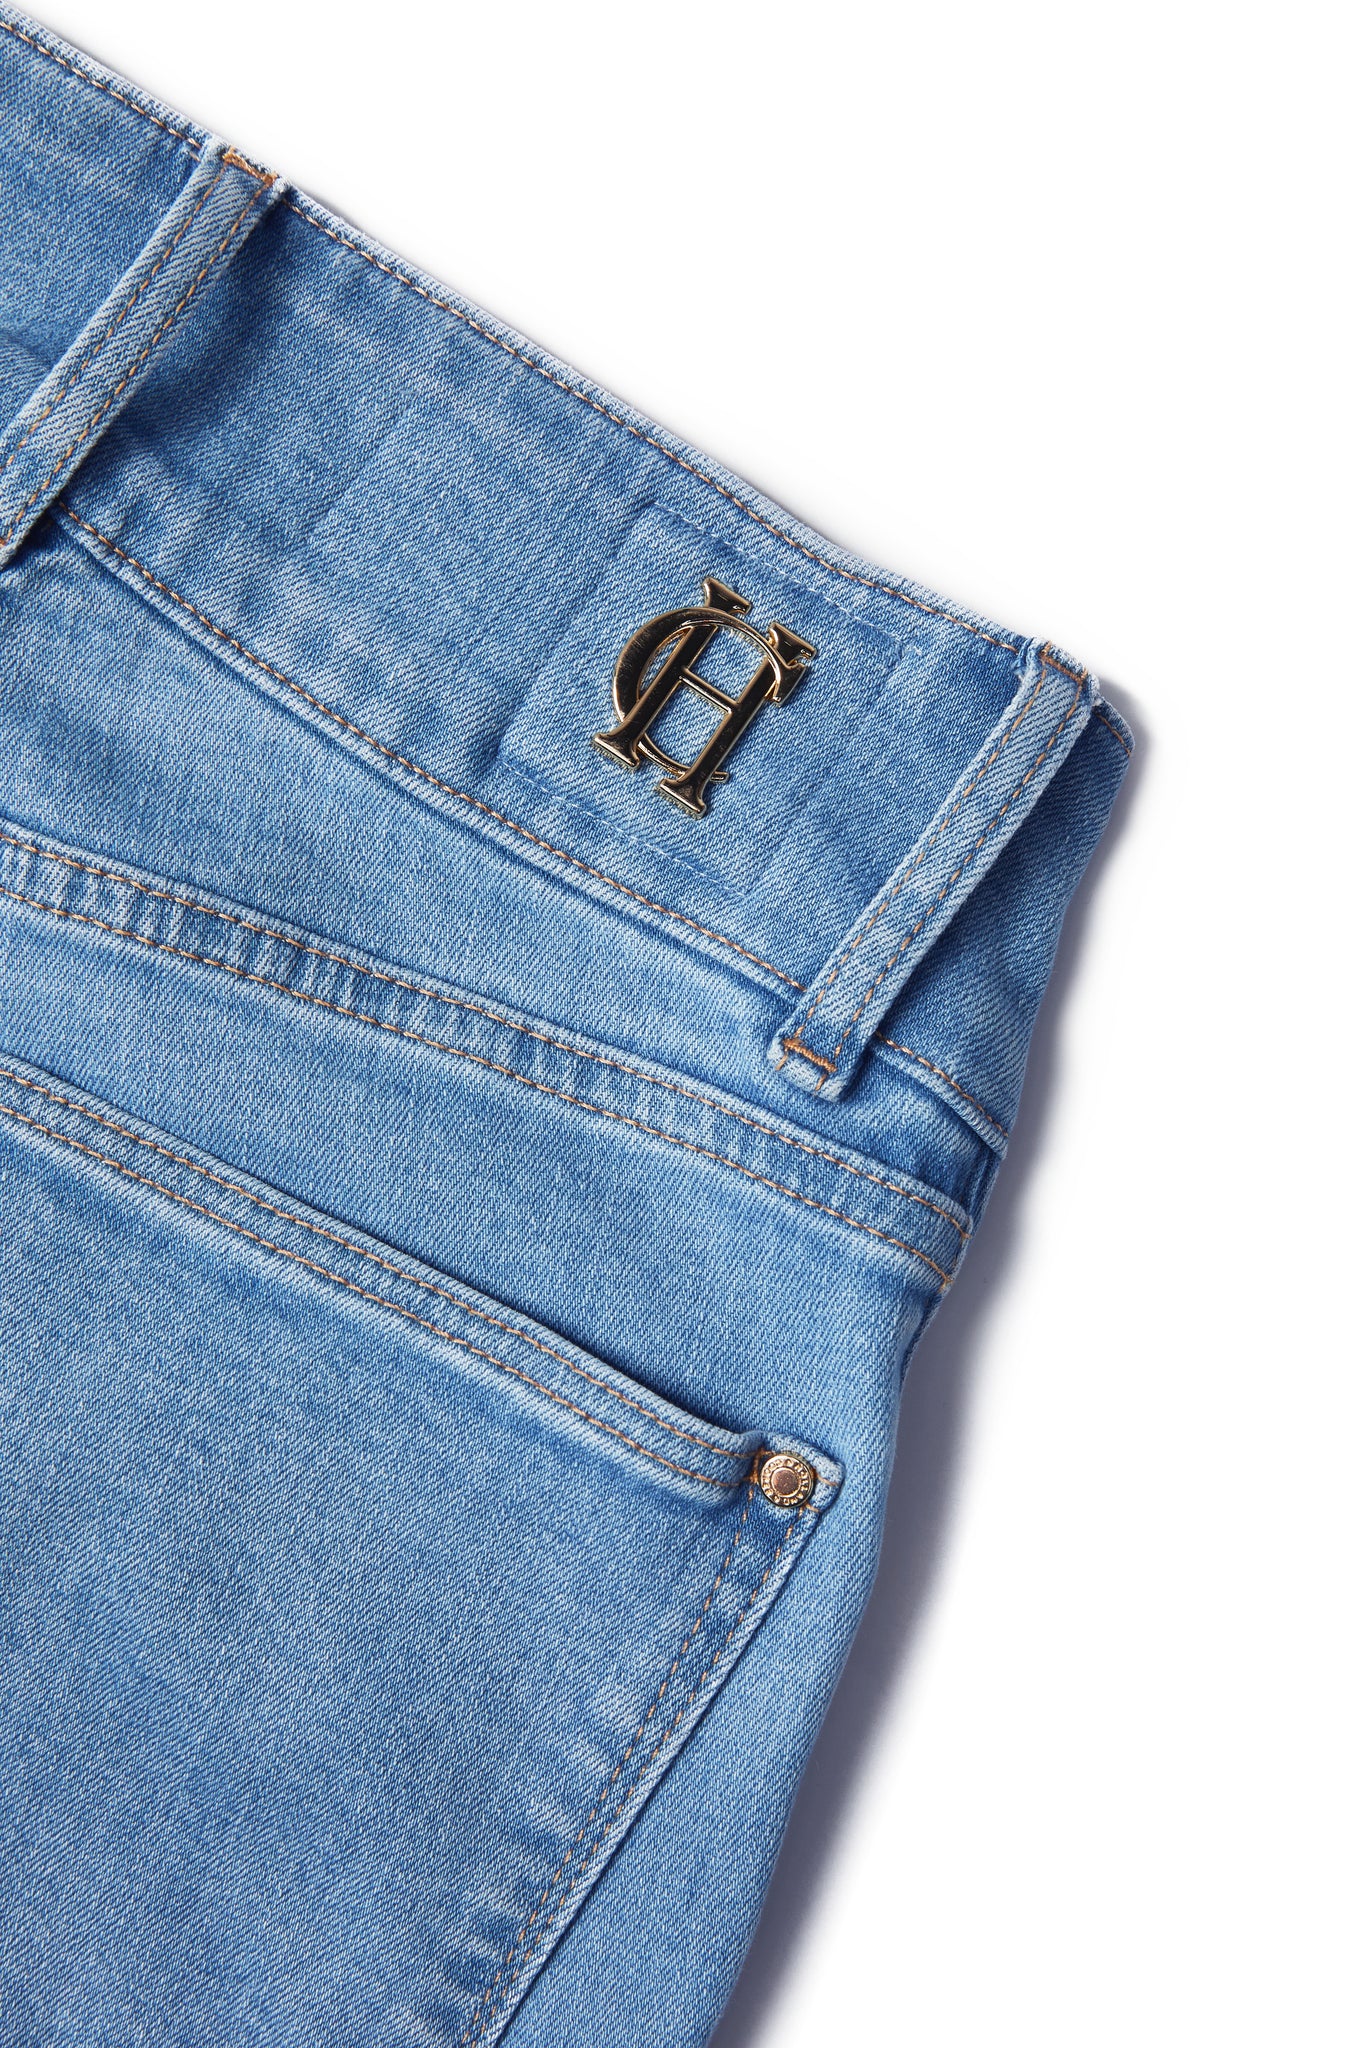 gold hardware detail on back waistband on womens high rise light blue flared jean with centre front zip fly fastening with two open pockets at the front and back